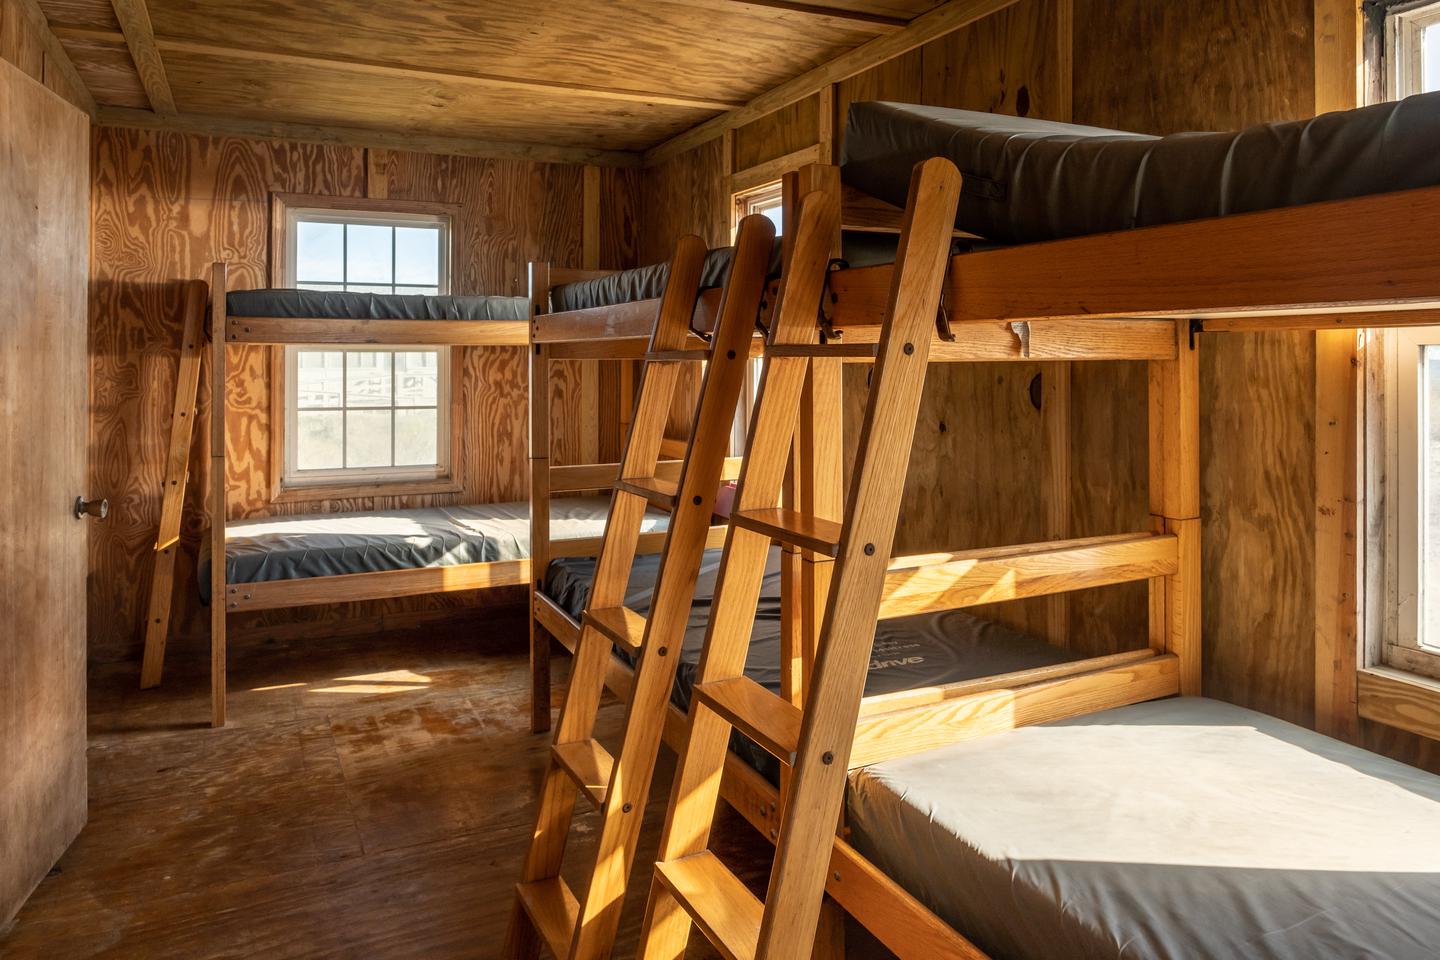 Bedroom with 3 bunk beds along the walls.Bedroom area.